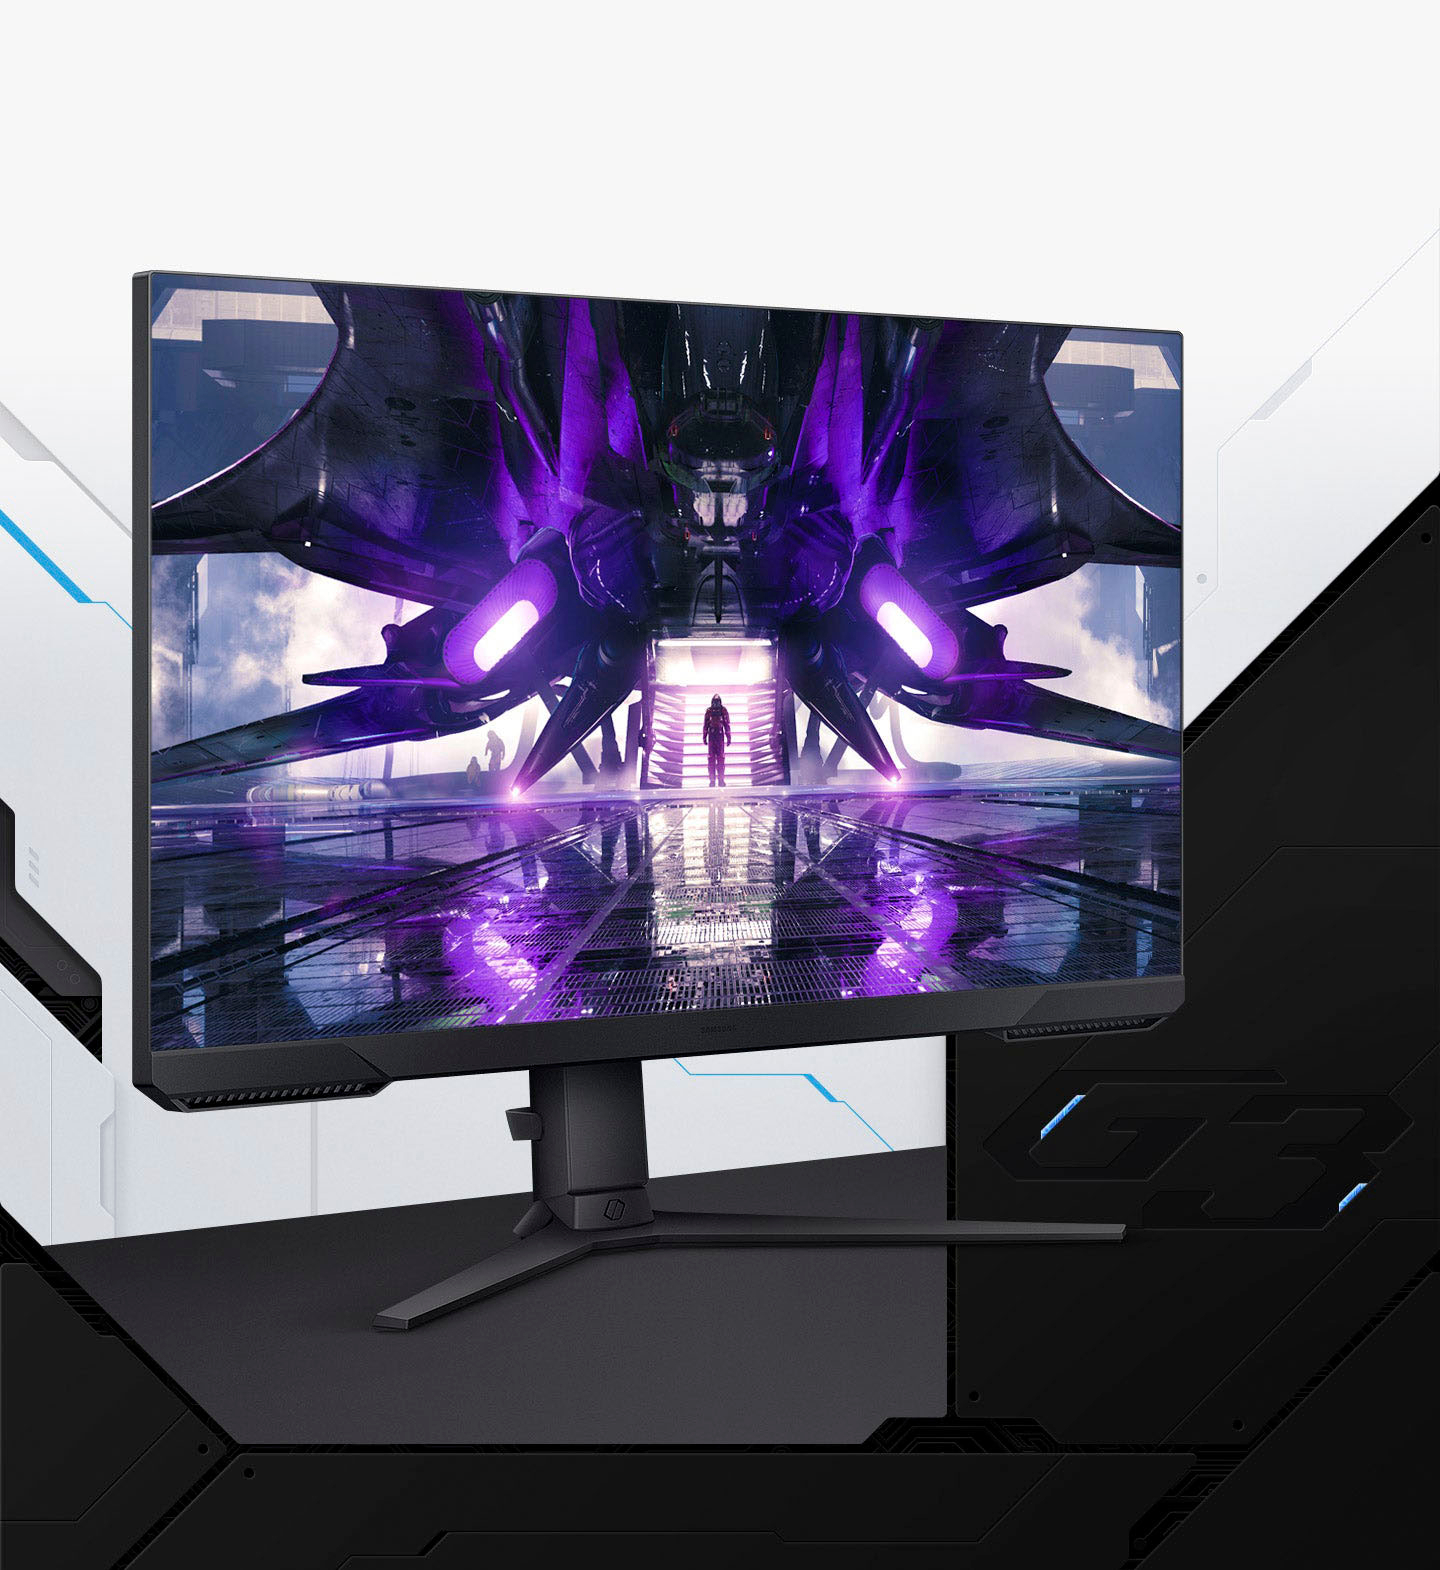  SAMSUNG Odyssey G3 Series 27-inch FHD 1080p Gaming Monitor,  144Hz, 1ms, Height Adjustable Stand, 3-Sided Border-Less, FreeSync Premium,  with MTC HDMI